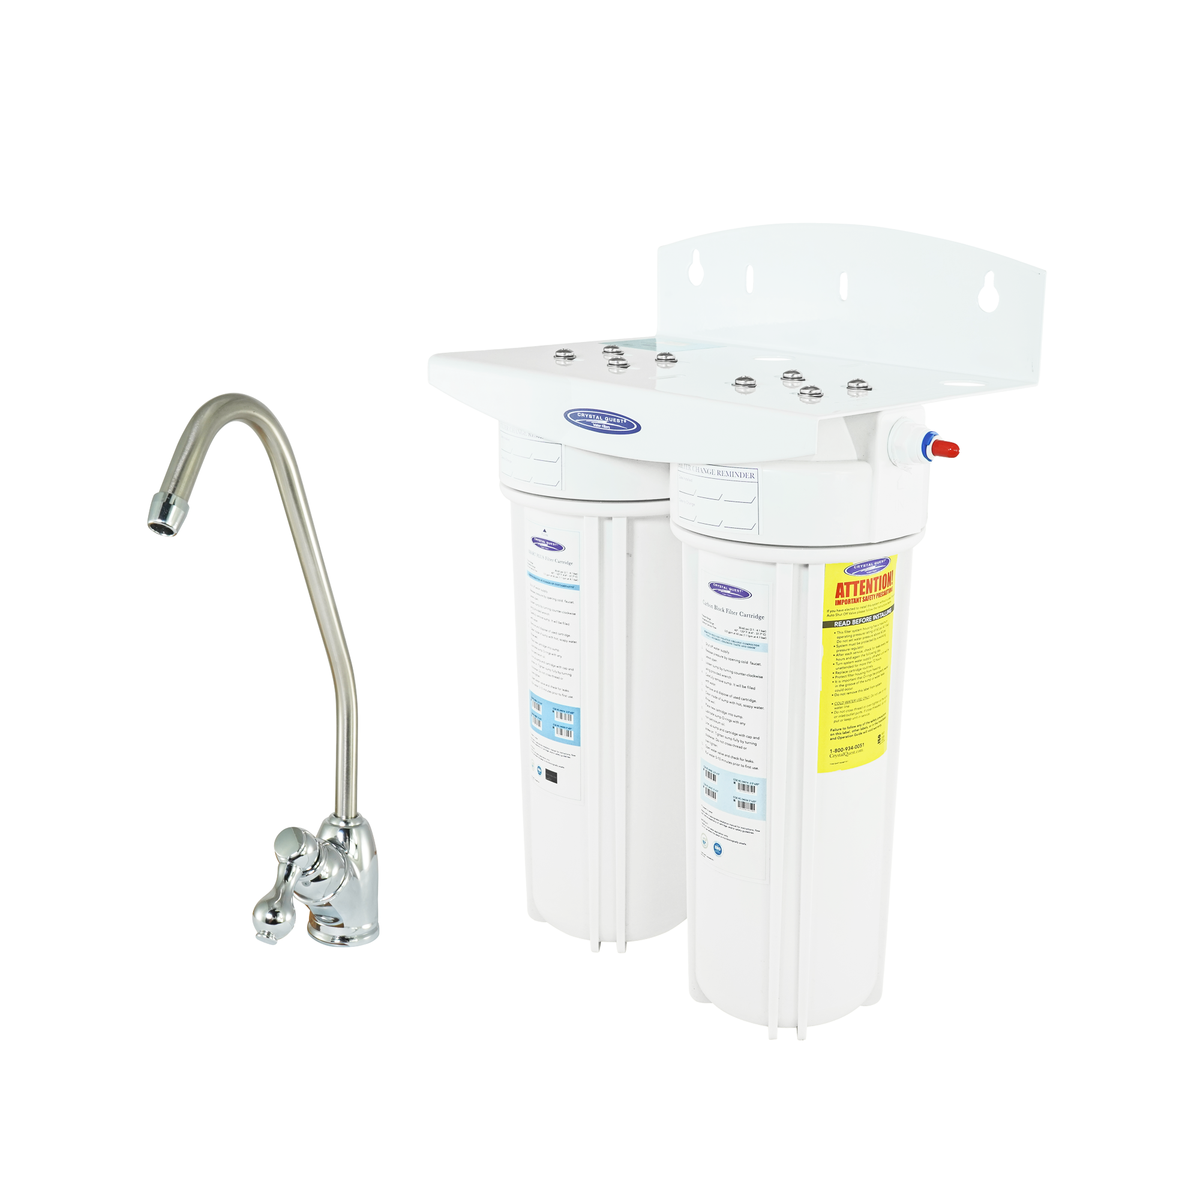 Double Arsenic Under Sink Water Filter System - Under Sink Water Filters - Crystal Quest